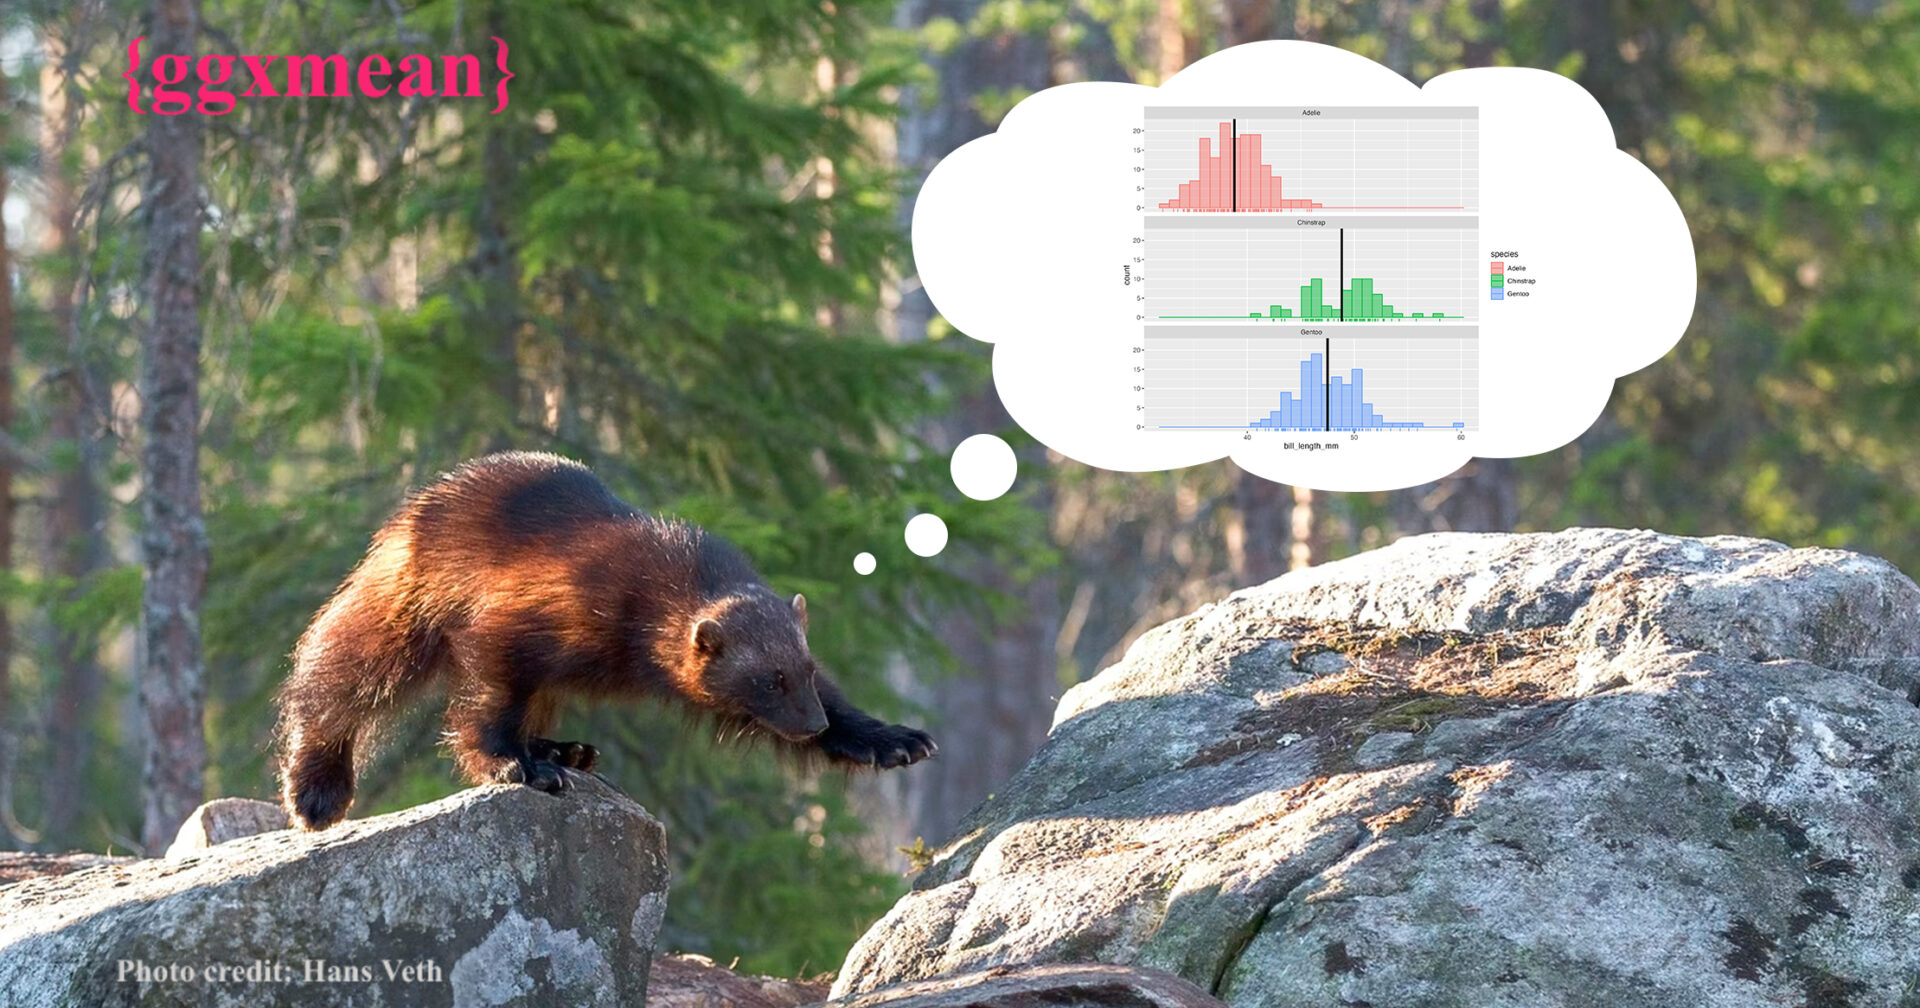 A baby wolverine walking between two rocks. The bear is thinking up a plot made with ggxmean that shows a histogram with lines at the mean. The top left says ggxmean in text.